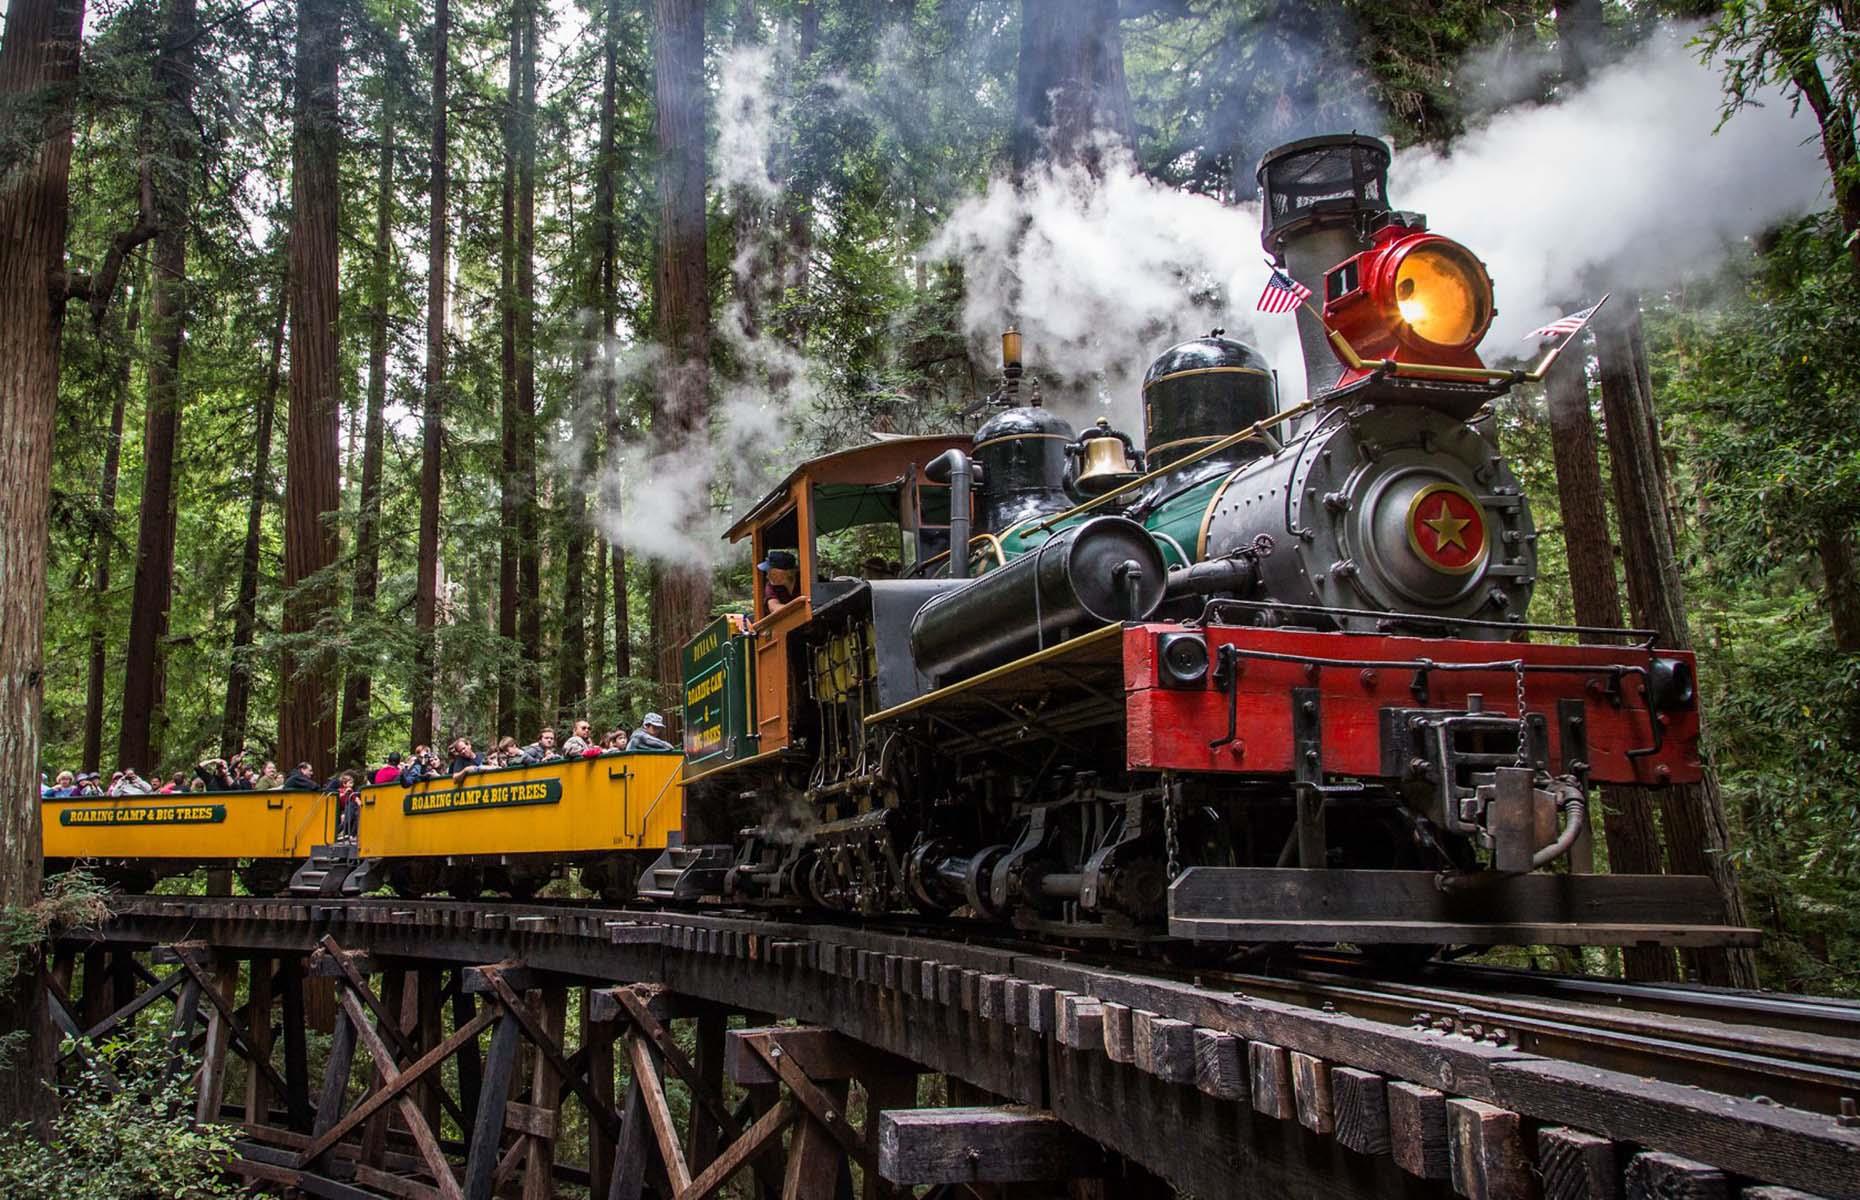 <p>California’s Roaring Camp Railroads offers two contrasting heritage services, both of which are great fun. The Redwood Forest Steam Train experience offers the chance to ride on a narrow-gauge steam train over trestle bridges and through towering redwoods. The train is pulled by one of the original 1890s narrow-gauge steam locomotives that were used to haul the giant redwood logs out of the mountains, and are among the oldest and most authentically preserved in America. (Image taken before the COVID-19 pandemic.)</p>